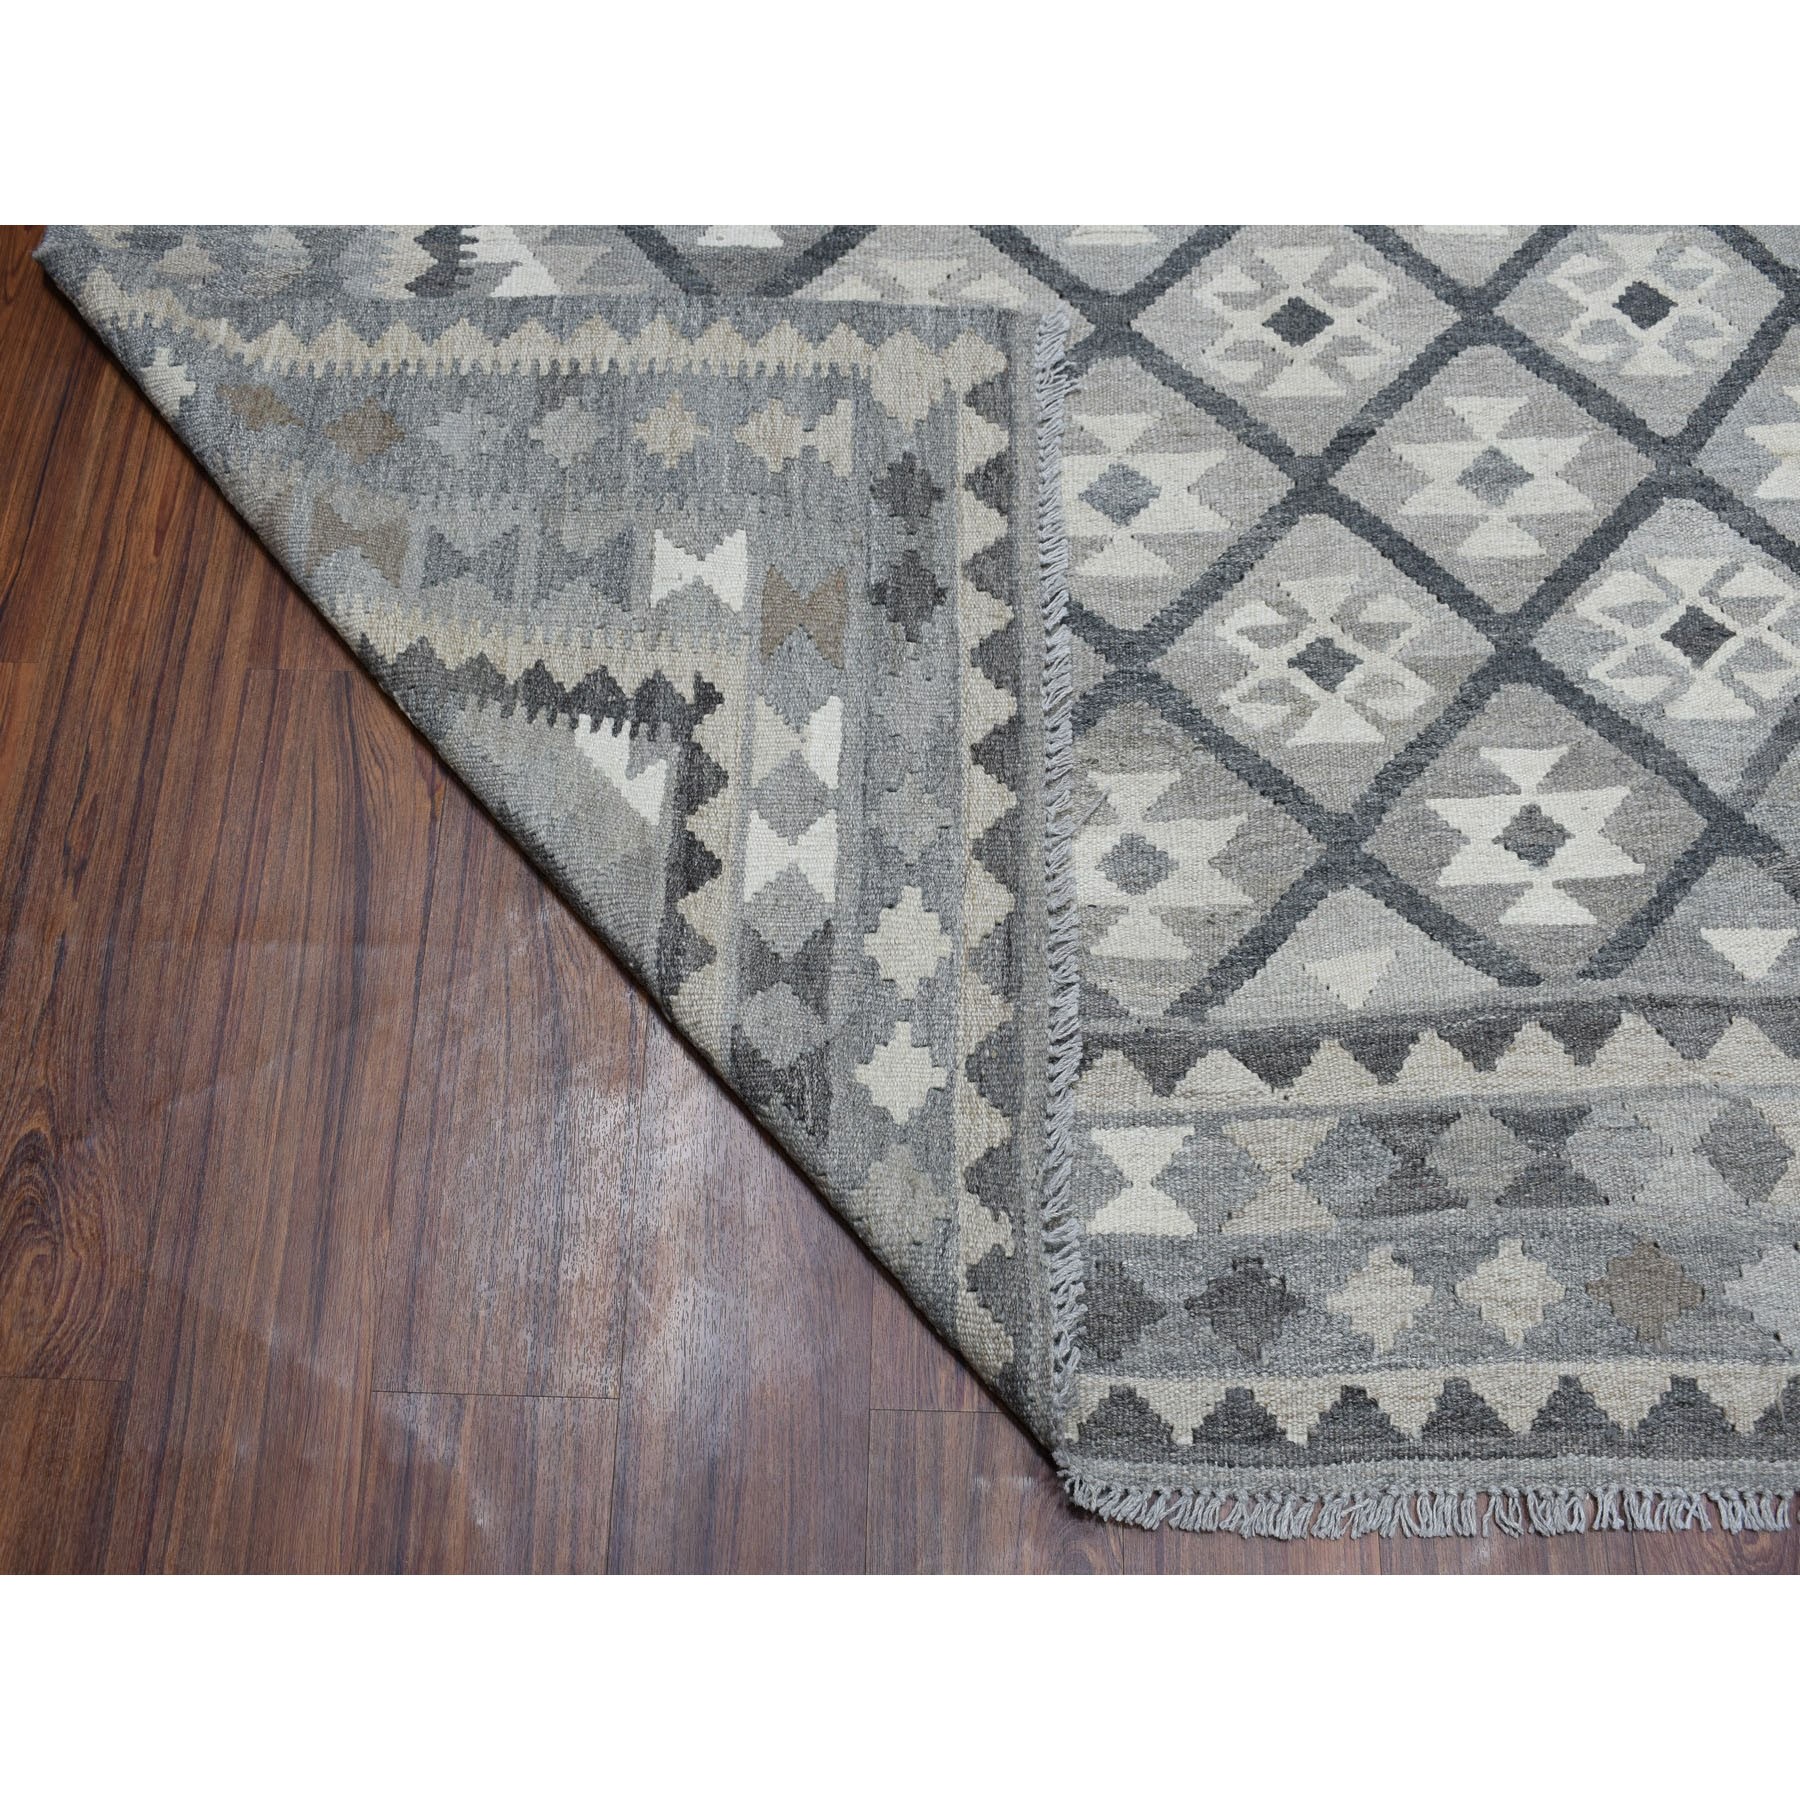 8-2 x9-8  Undyed Natural Wool Afghan Kilim Reversible Hand Woven Oriental Rug 